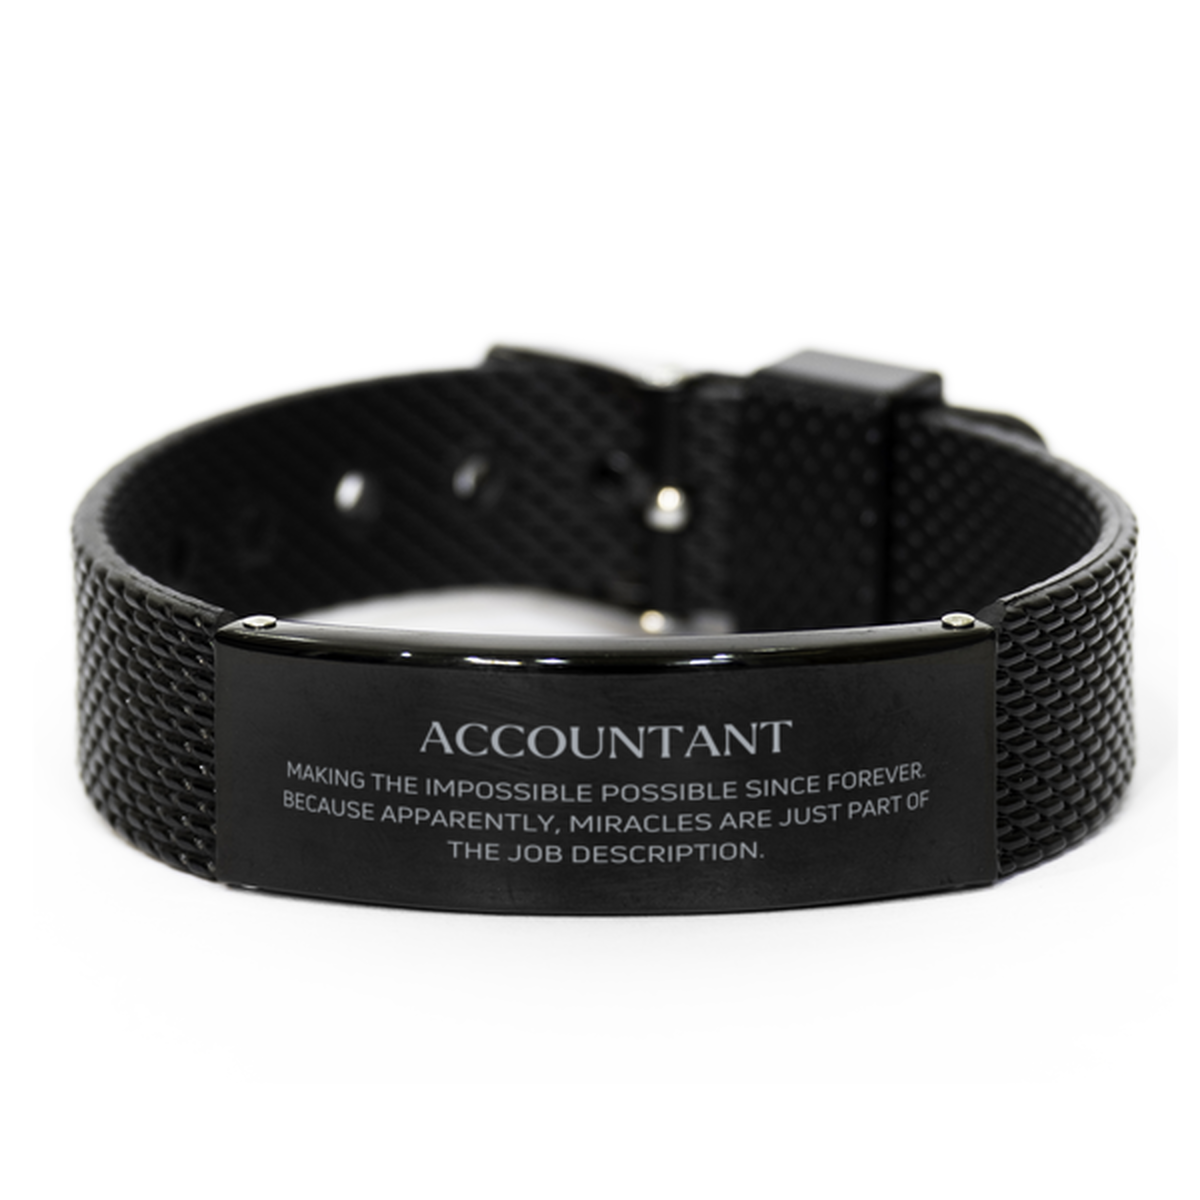 Funny Accountant Gifts, Miracles are just part of the job description, Inspirational Birthday Black Shark Mesh Bracelet For Accountant, Men, Women, Coworkers, Friends, Boss